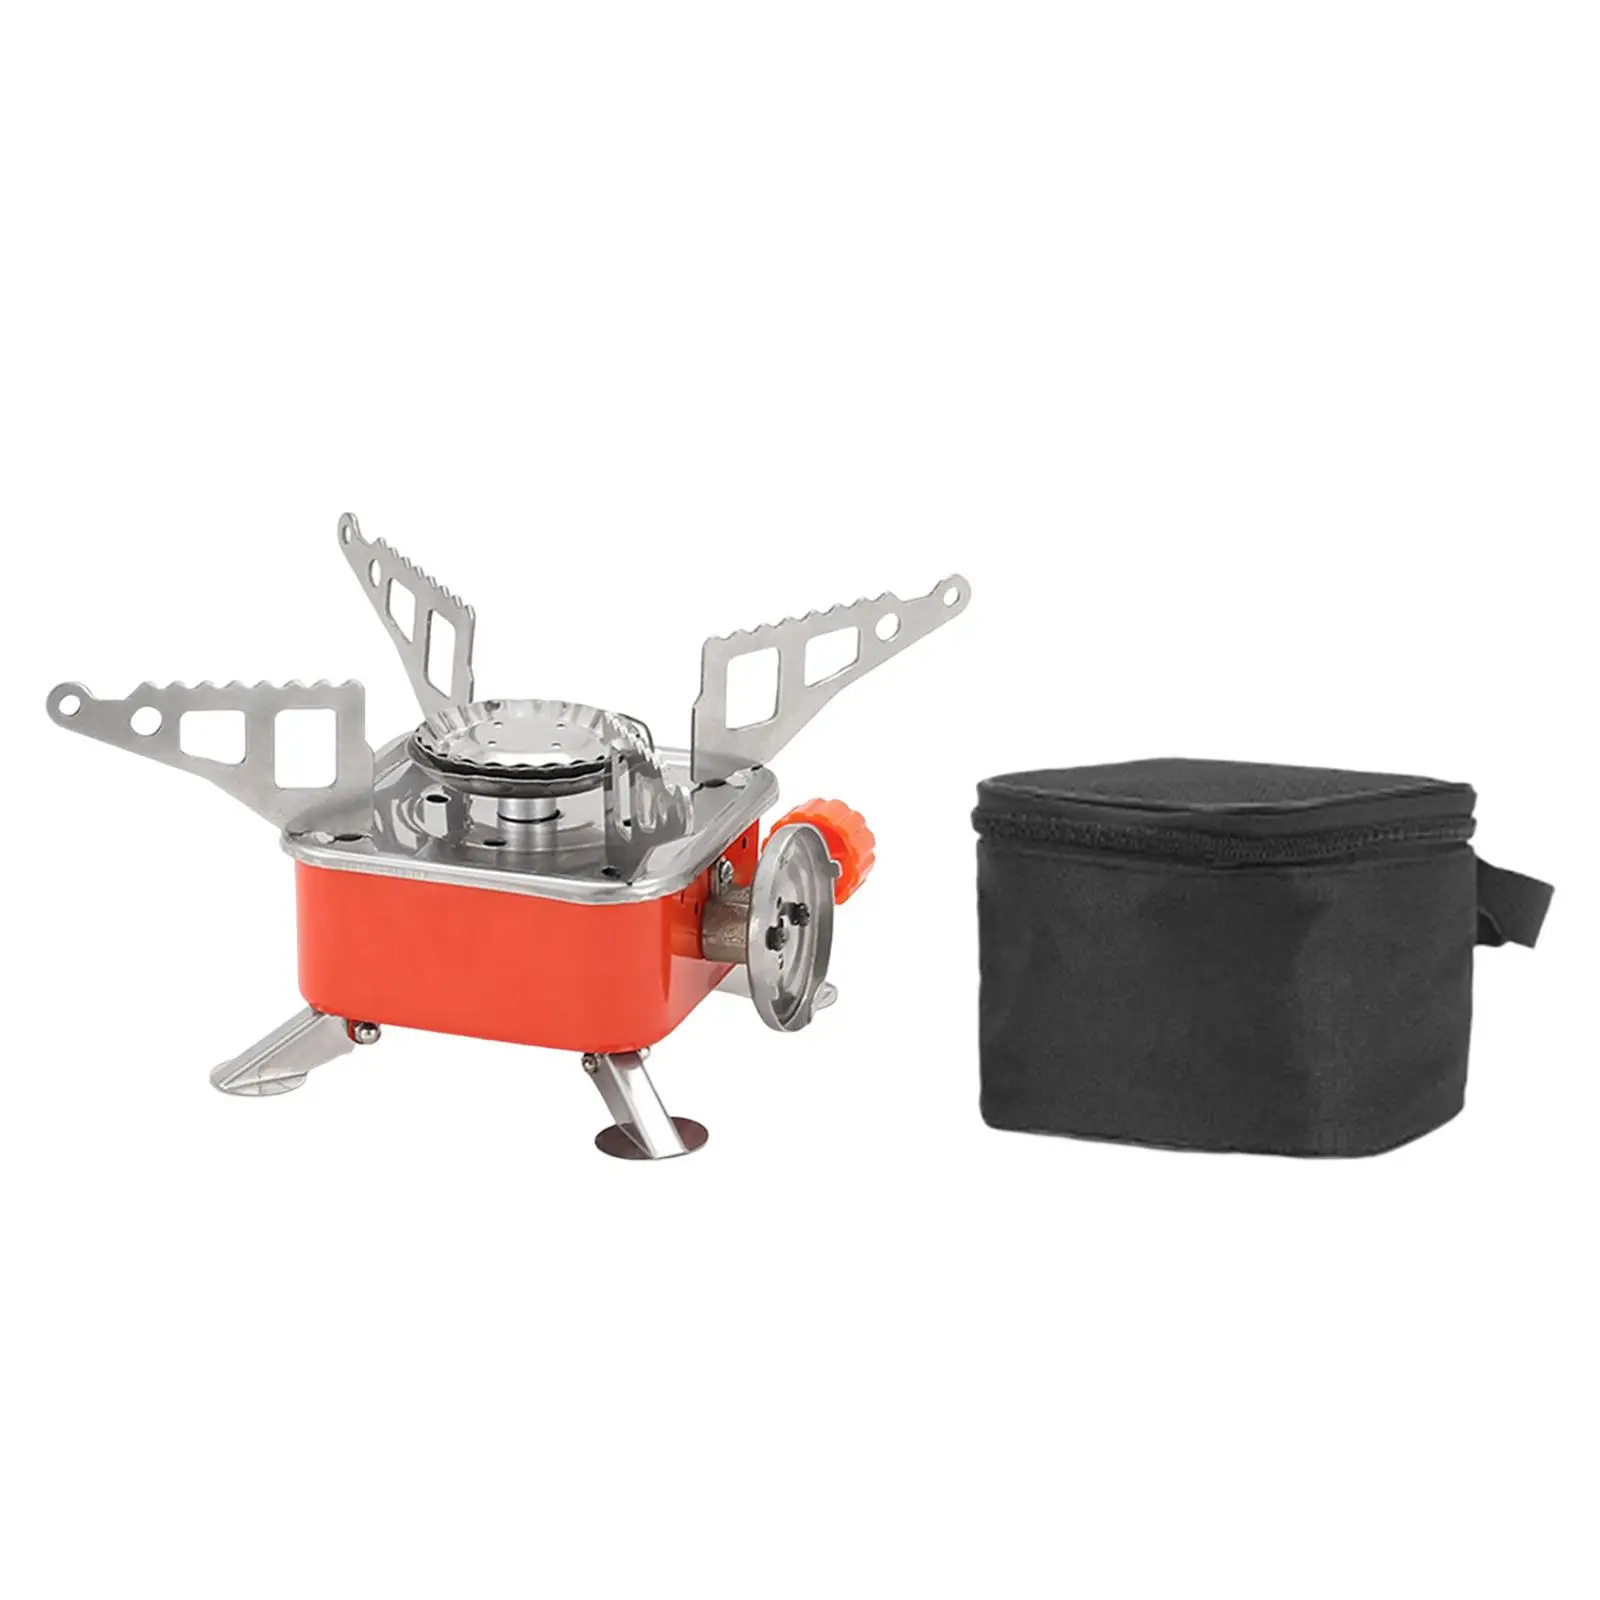 Portable Camping Gas Stove Mini with Storage Case Folding for Outdoor Picnic